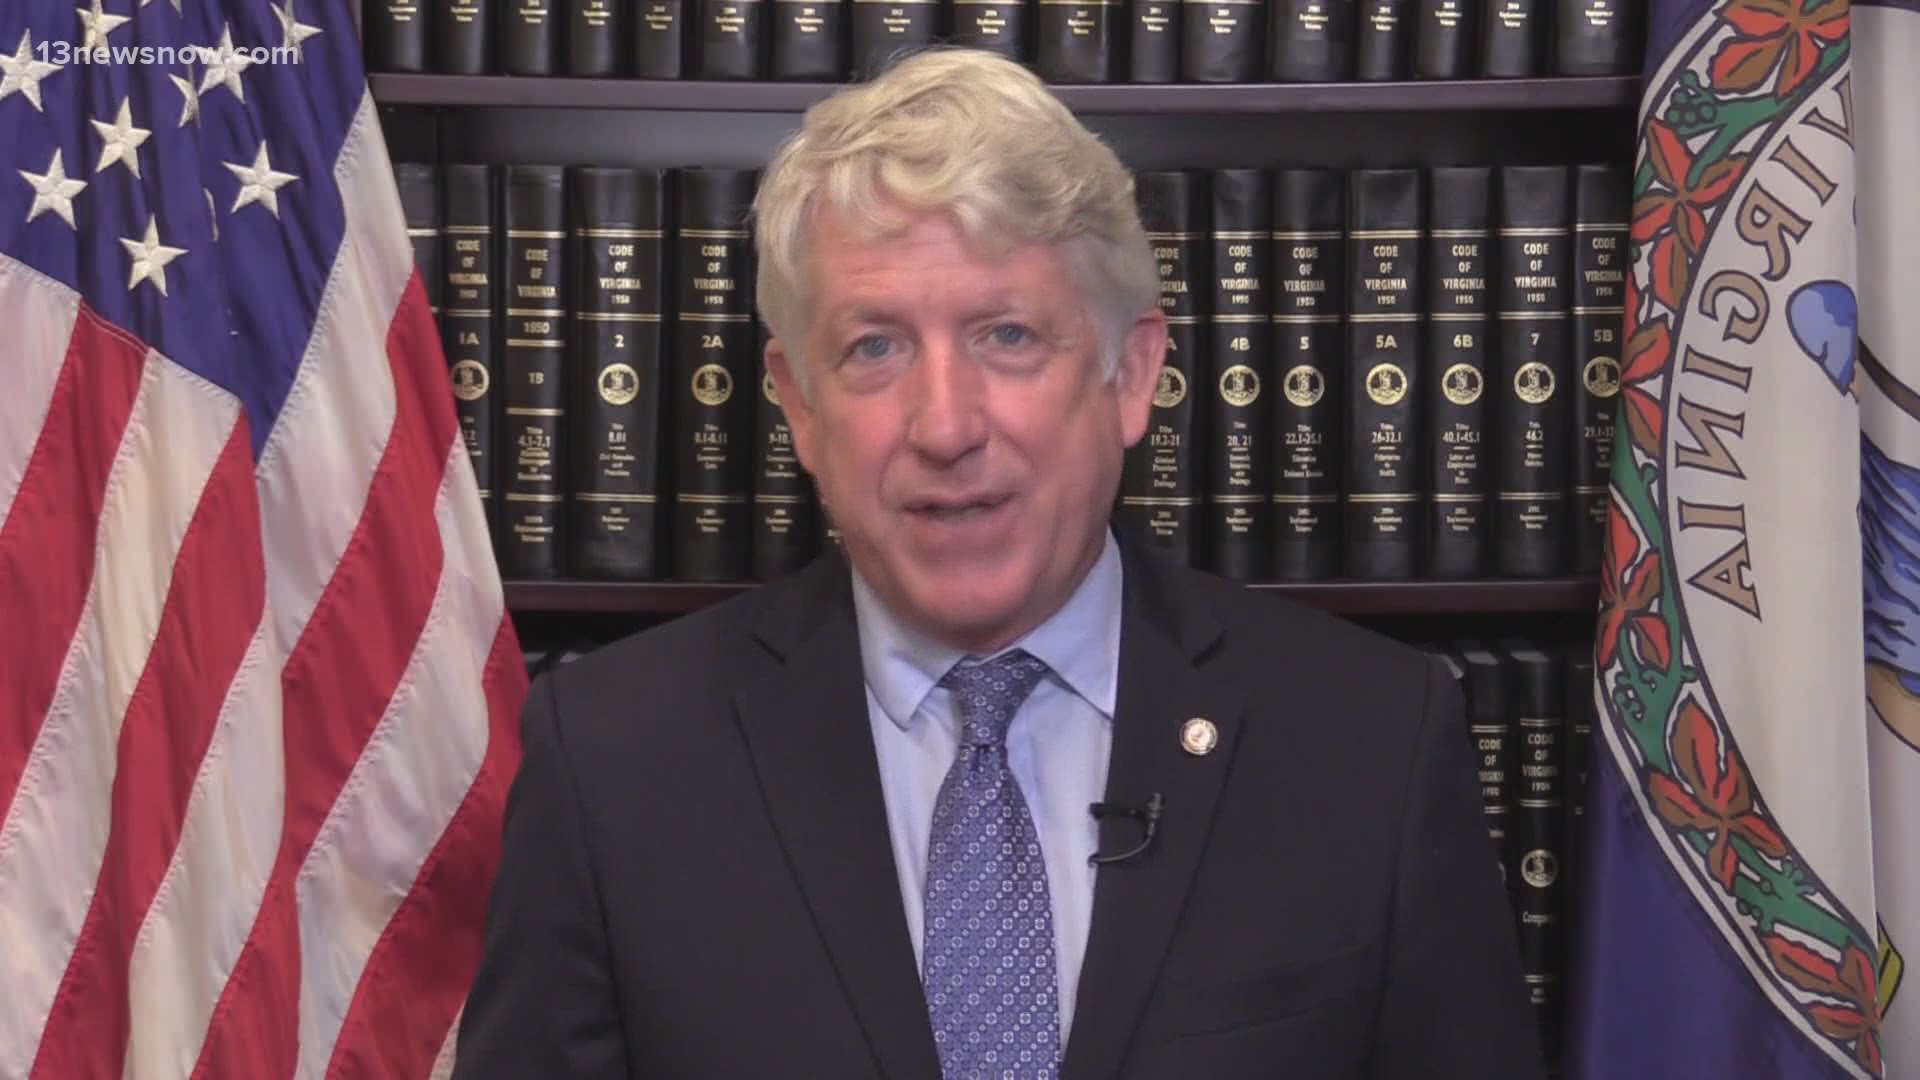 Attorney General Mark Herring will run again to be Virginia's top prosecutor. There were rumblings that Herring would run for governor in 2021.